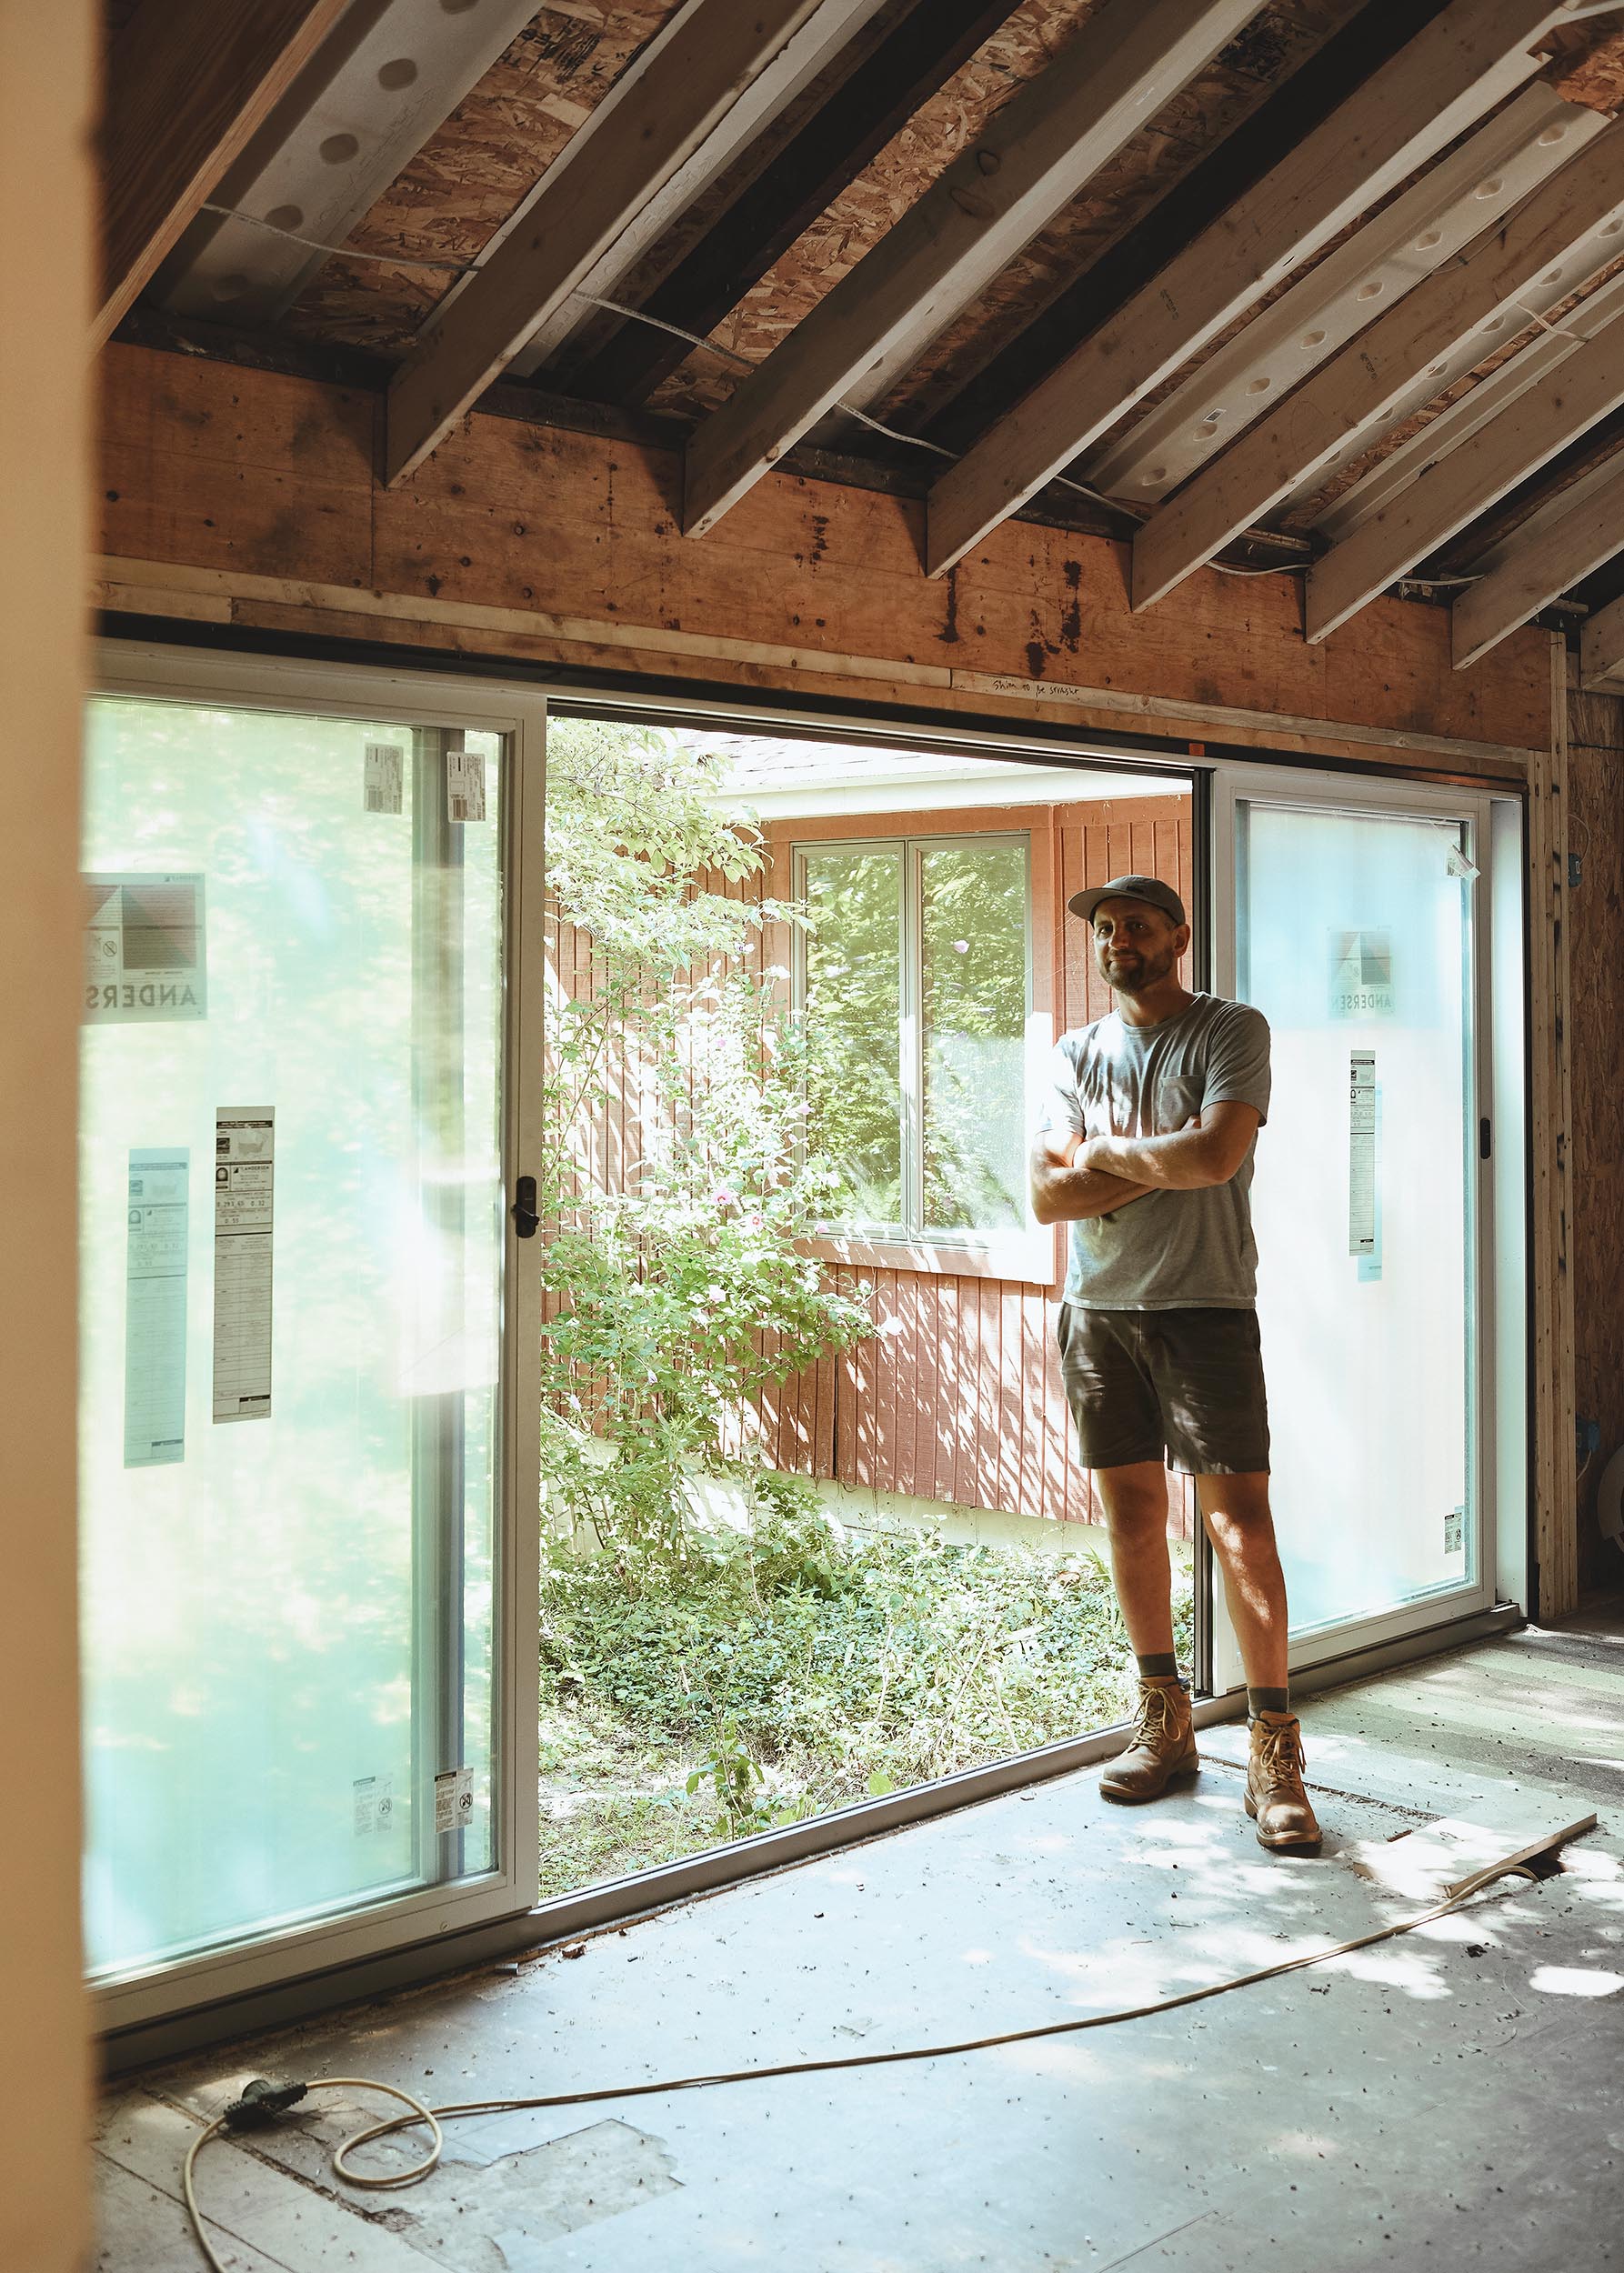 Scott for scale! This door is huge and lets in so much natural light // via Yellow Brick Home